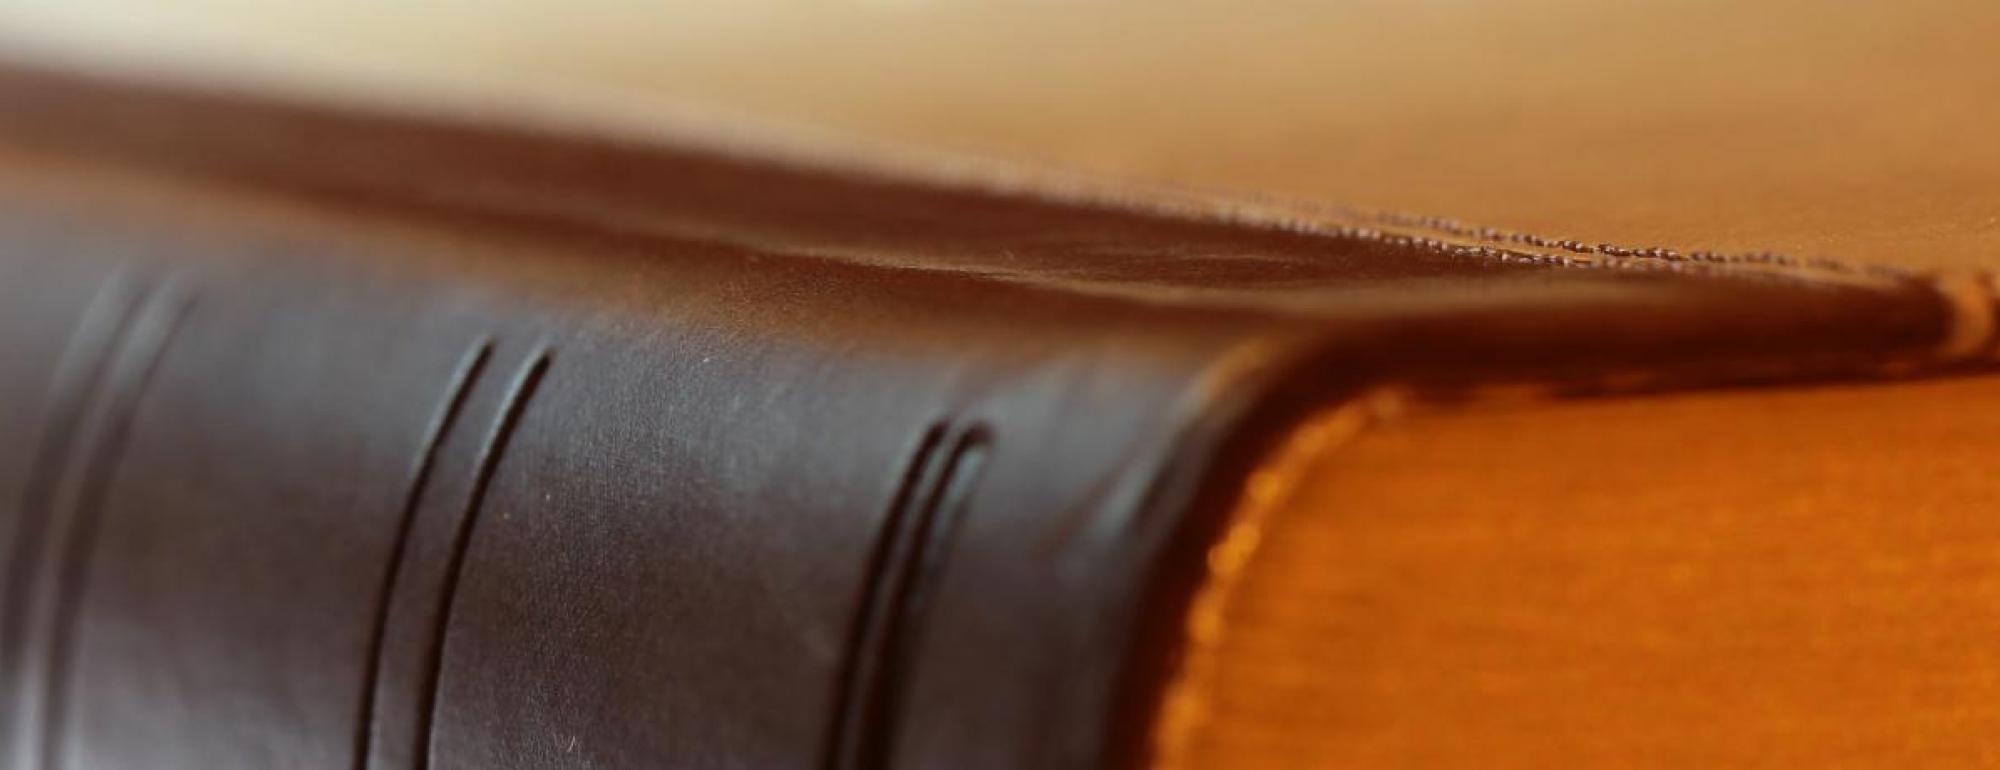 brown leather cover book 